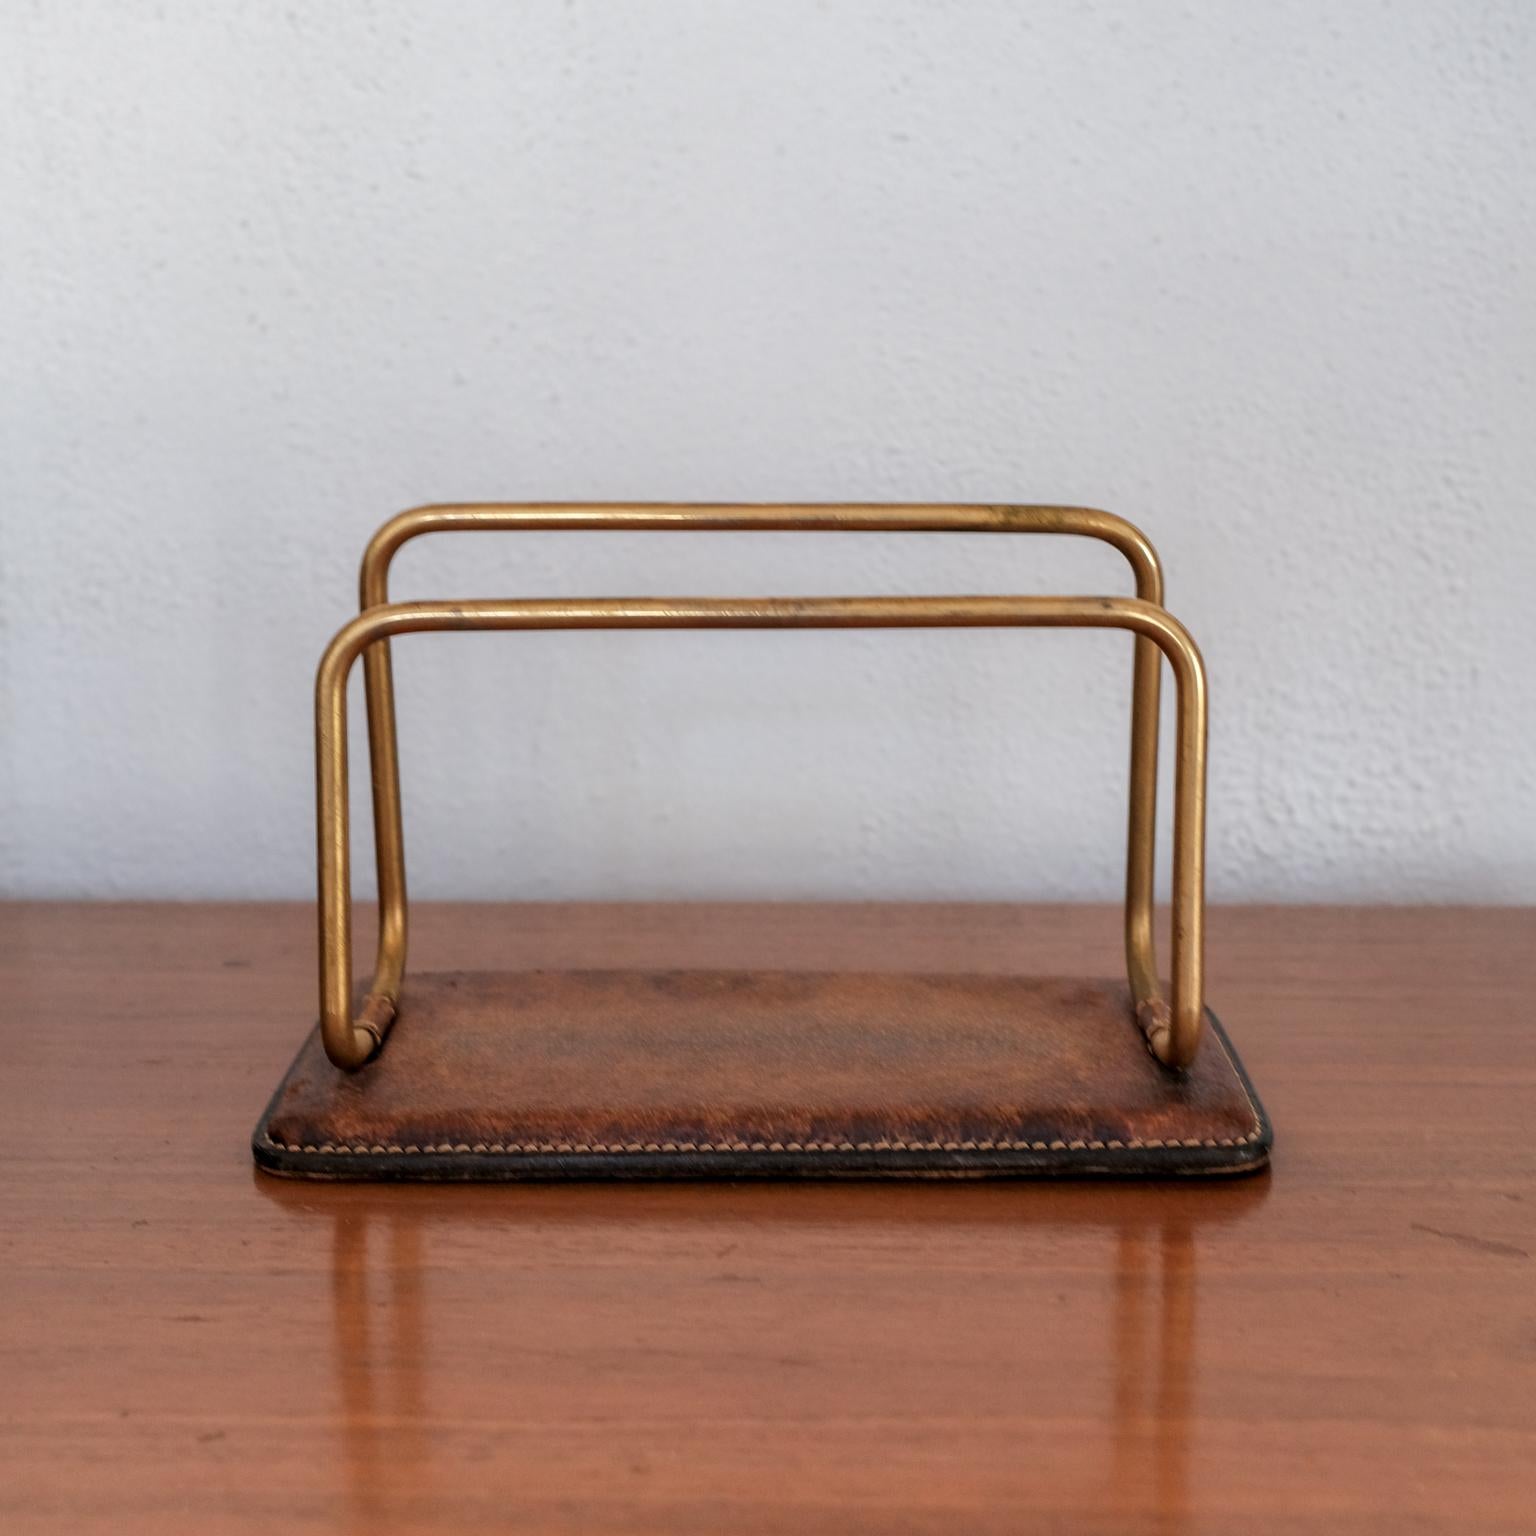 Vintage Gucci Leather and Brass Letter Holder 3